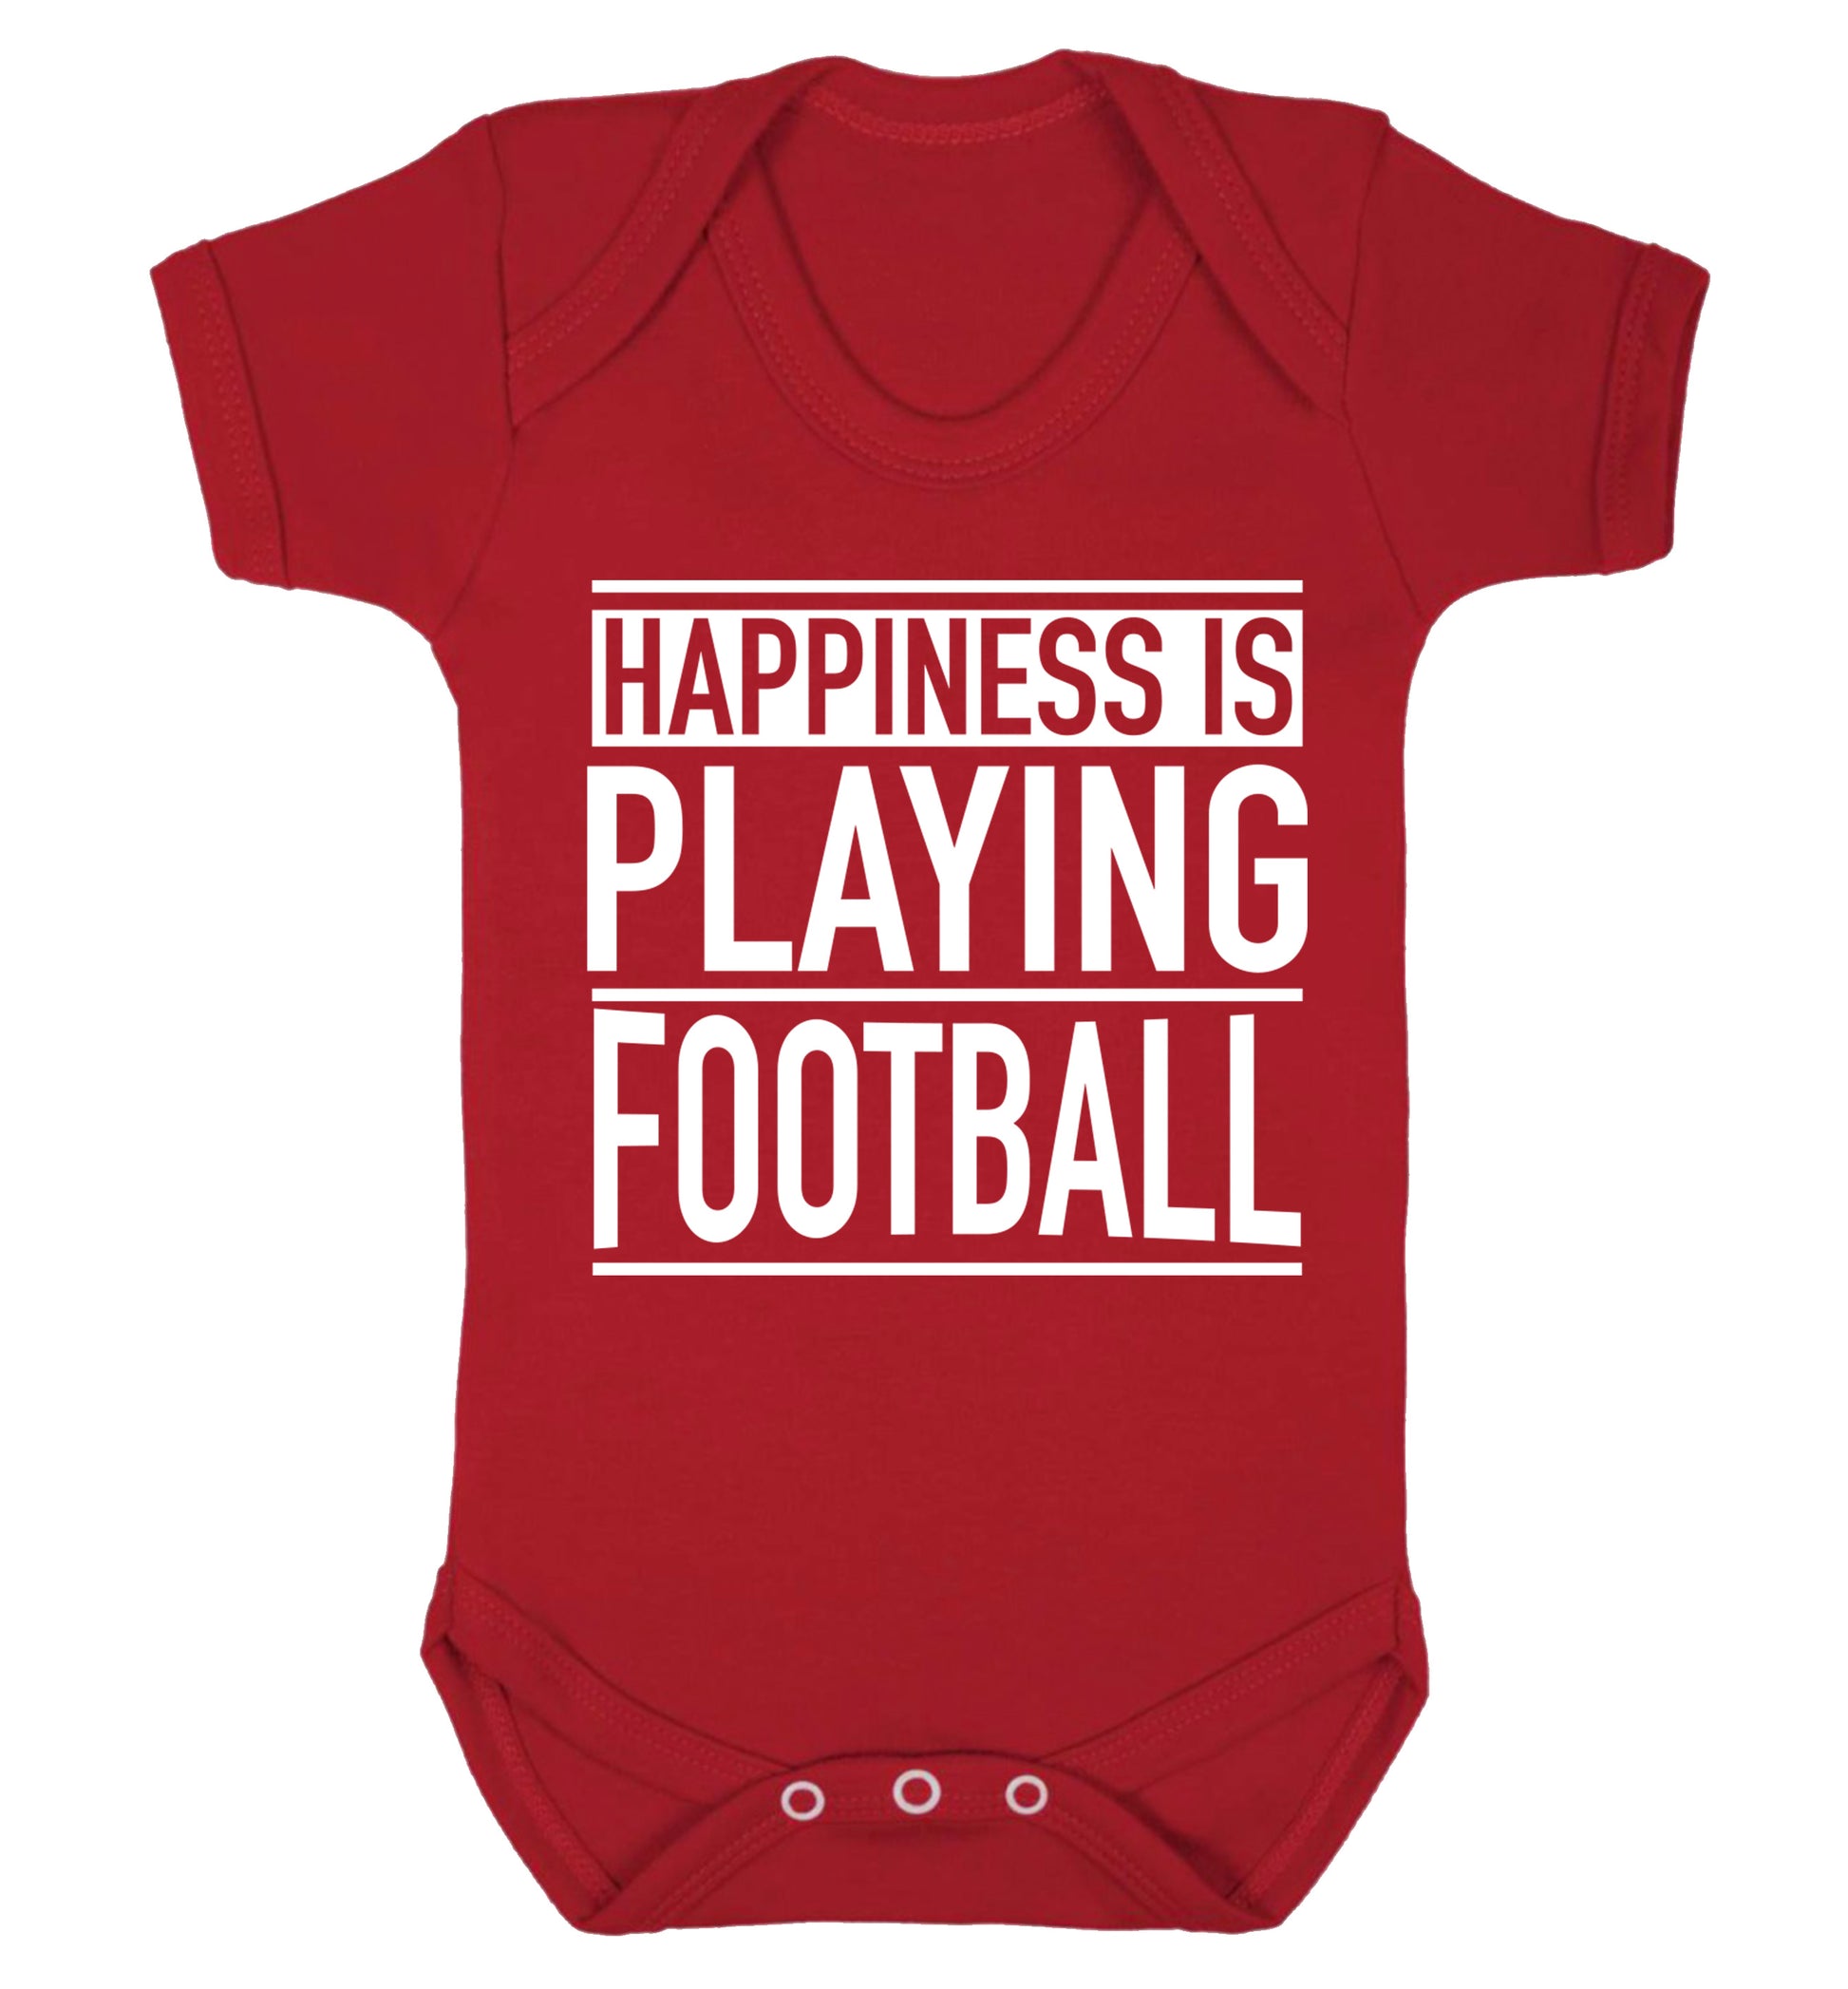 Happiness is playing football Baby Vest red 18-24 months